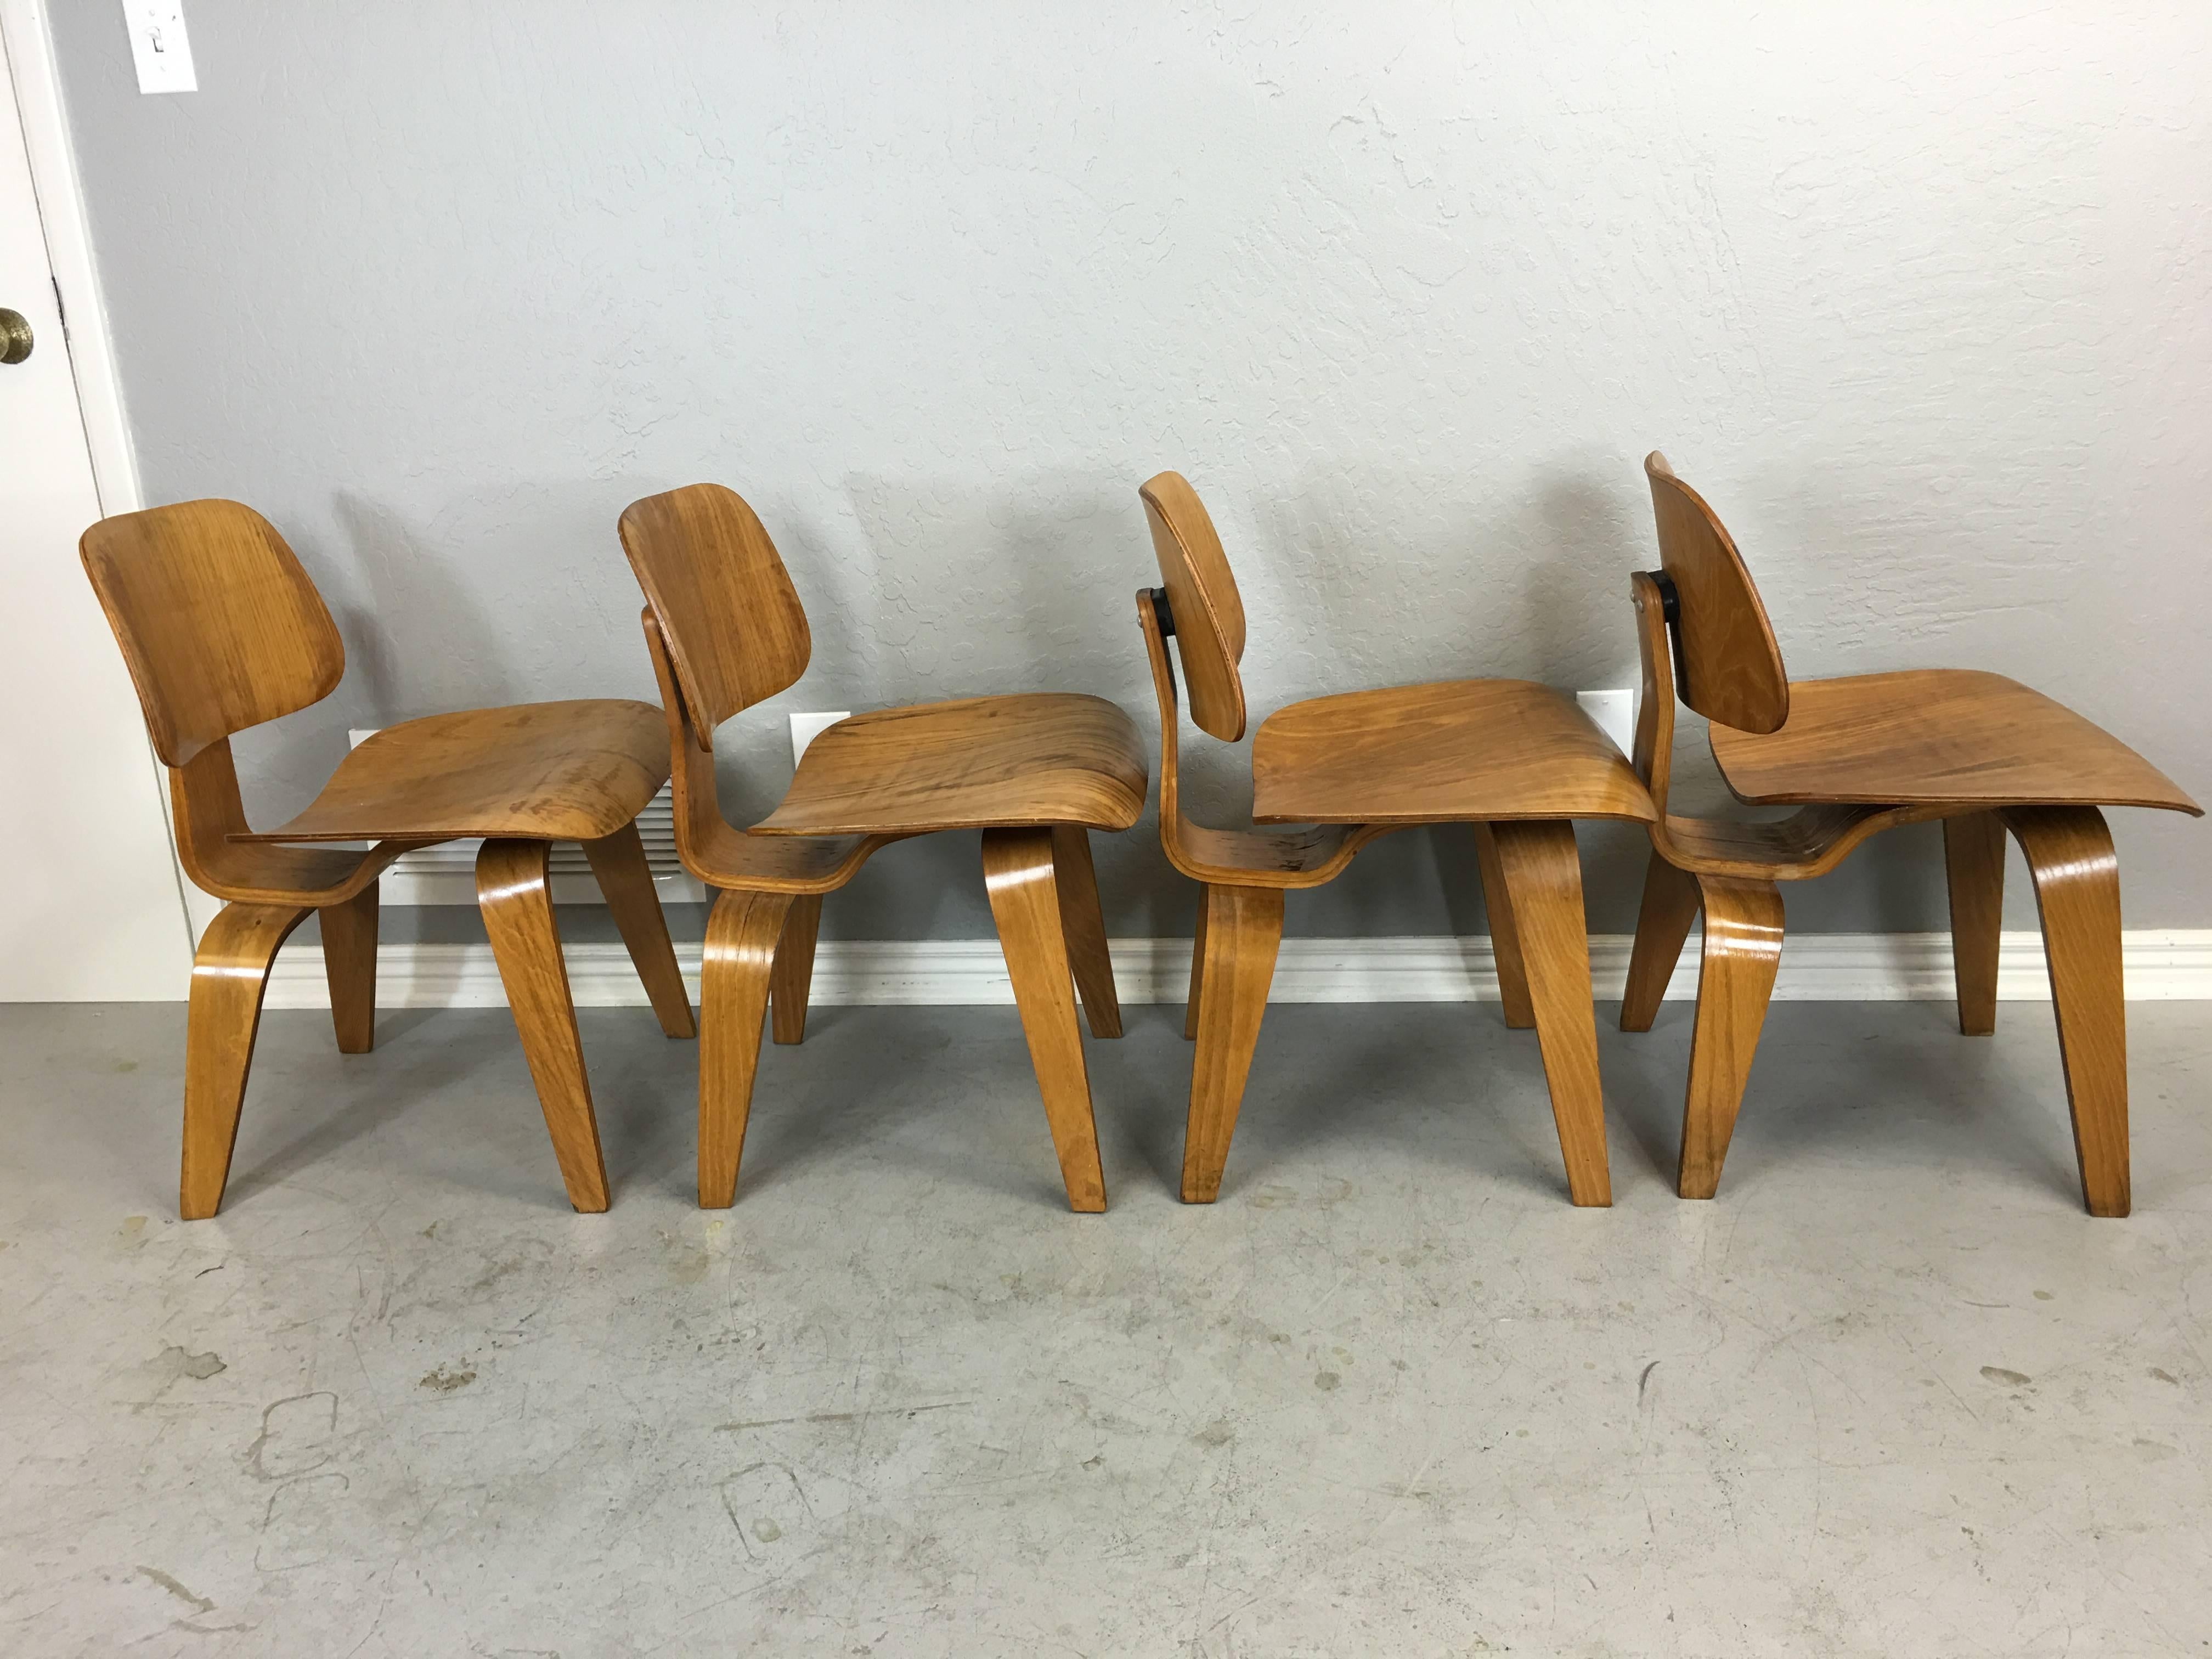 Four Charles Eames DCW chairs made by the Evans Products Company for Herman Miller. c.1946. Condition is very good to excellent. Not missing any veneer. Original patina. Untouched except light oil to preserve the wood. They are solid. No wobbly.